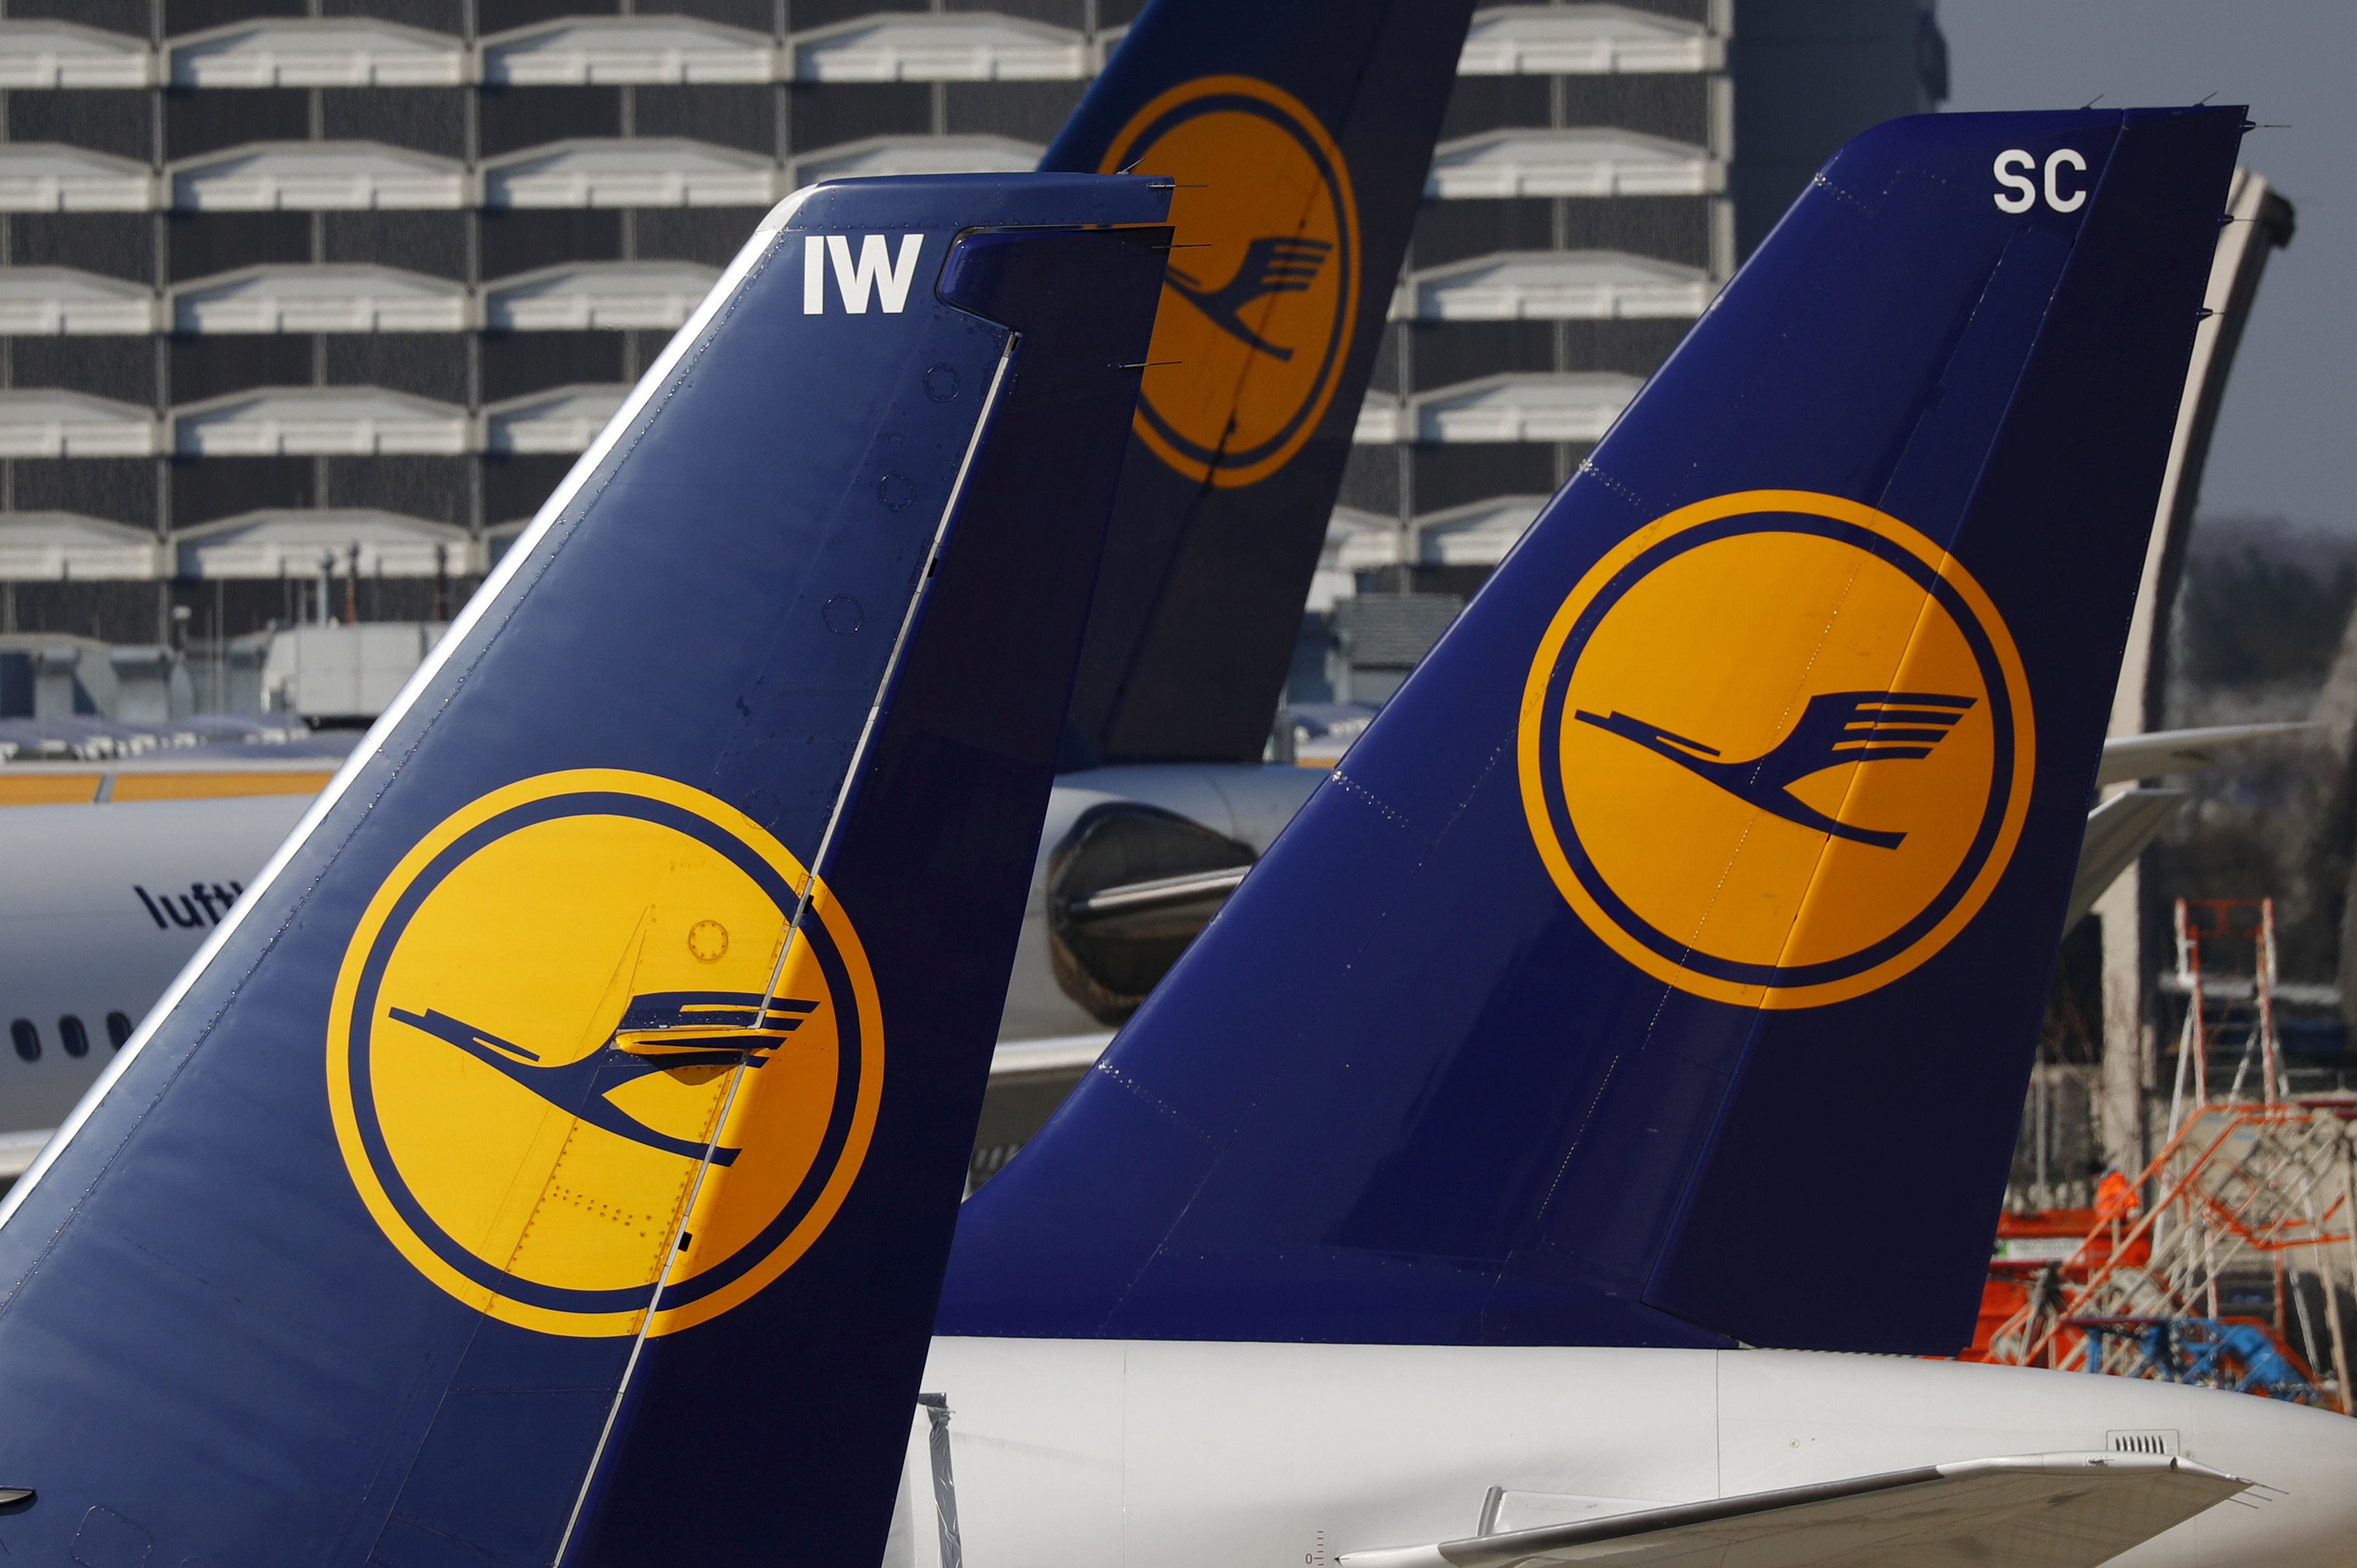 Lufthansa cancels 876 flights on Wednesday due to pilots' strike